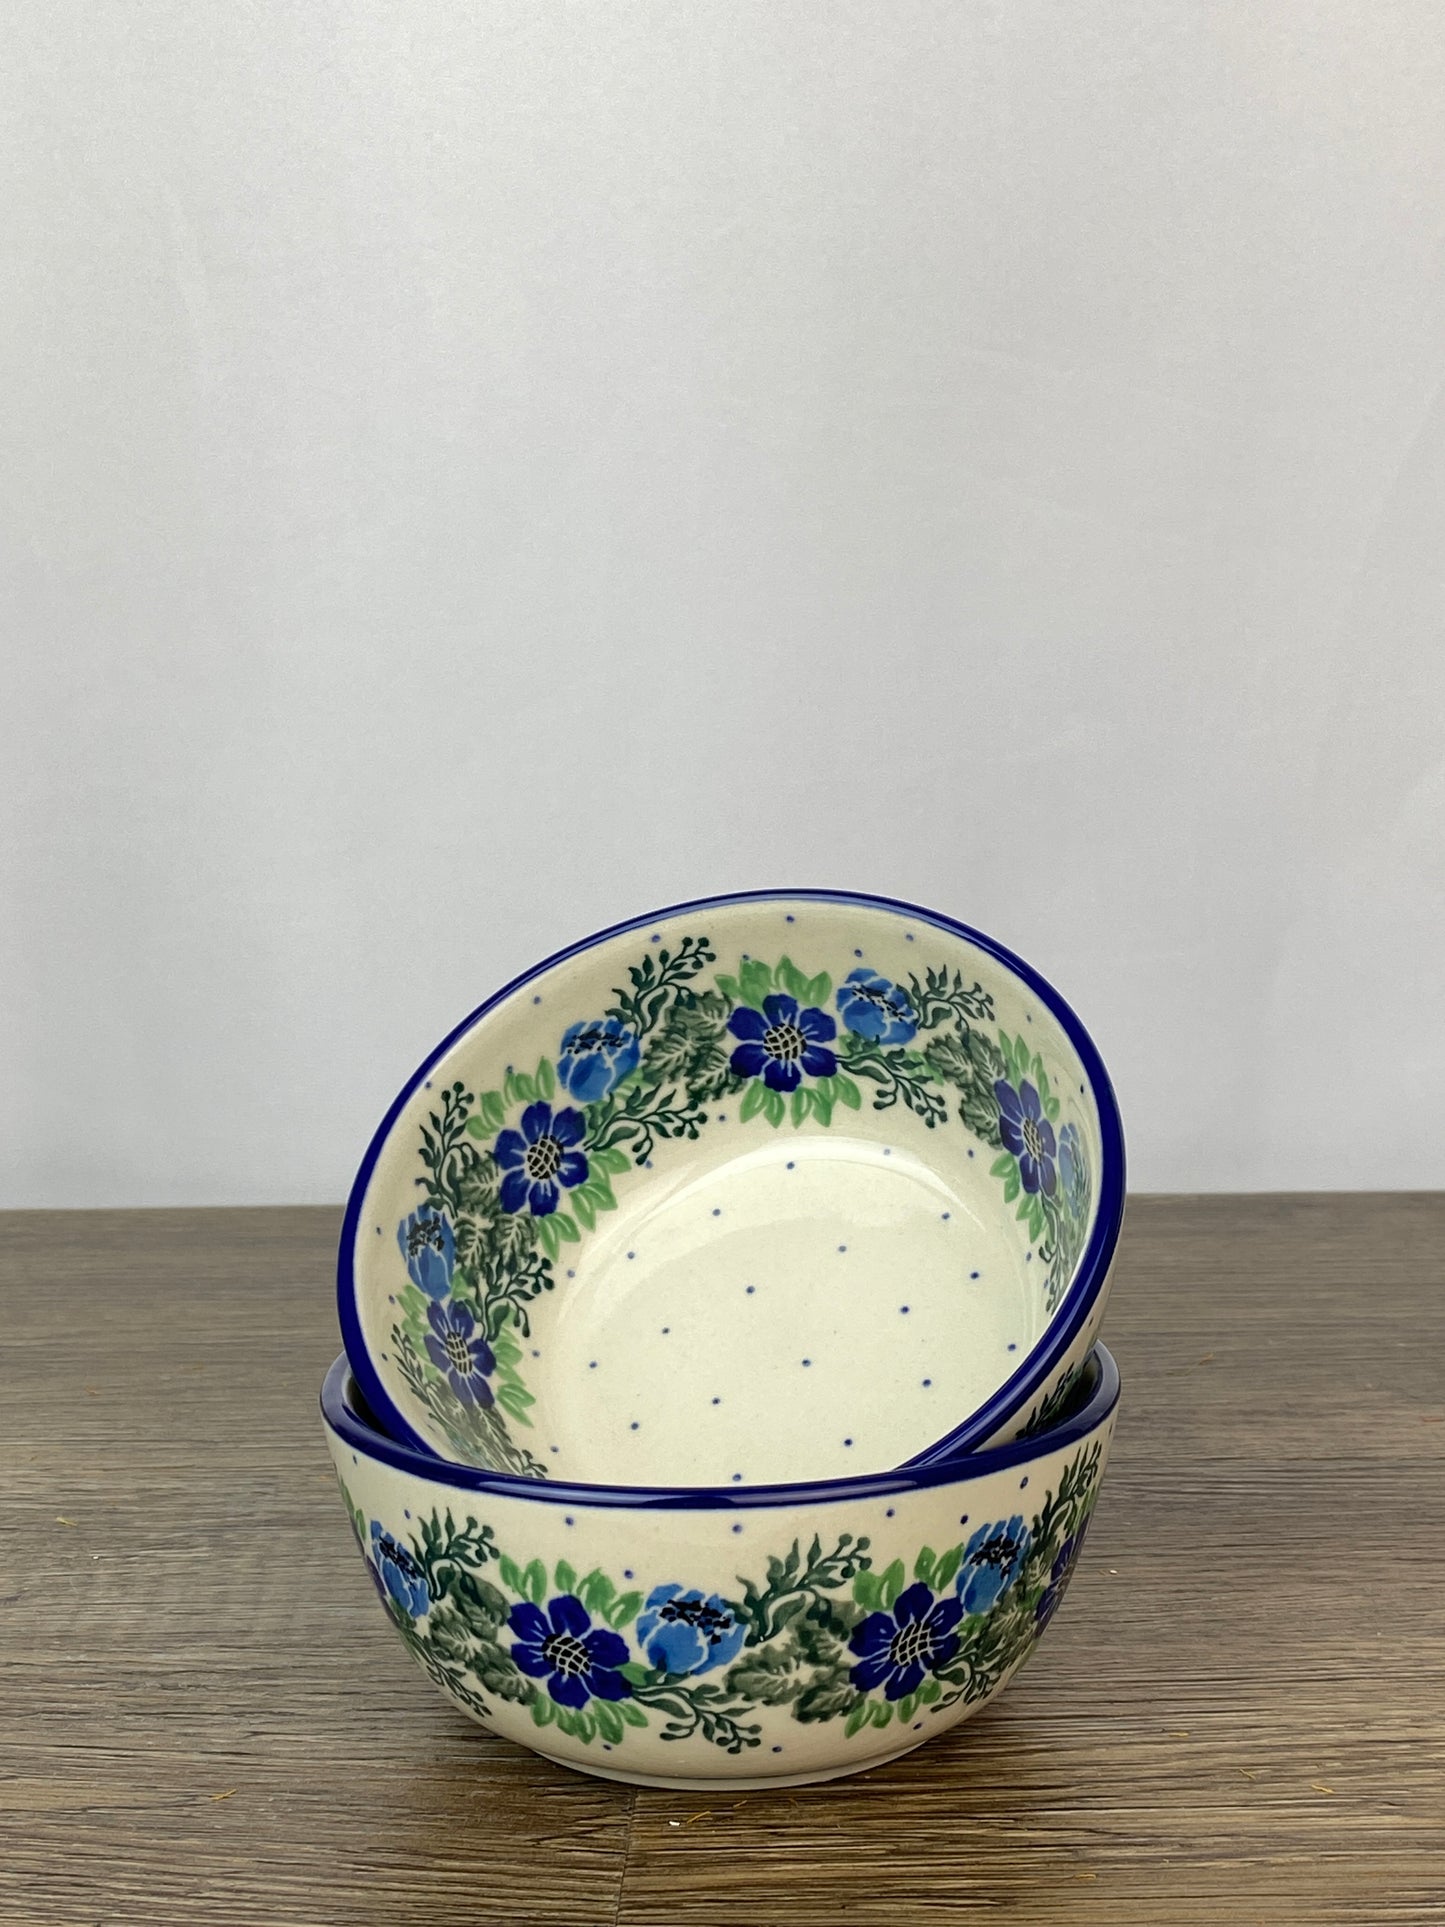 Small Cereal / Dessert Bowl - Shape 17 - Pattern 1534